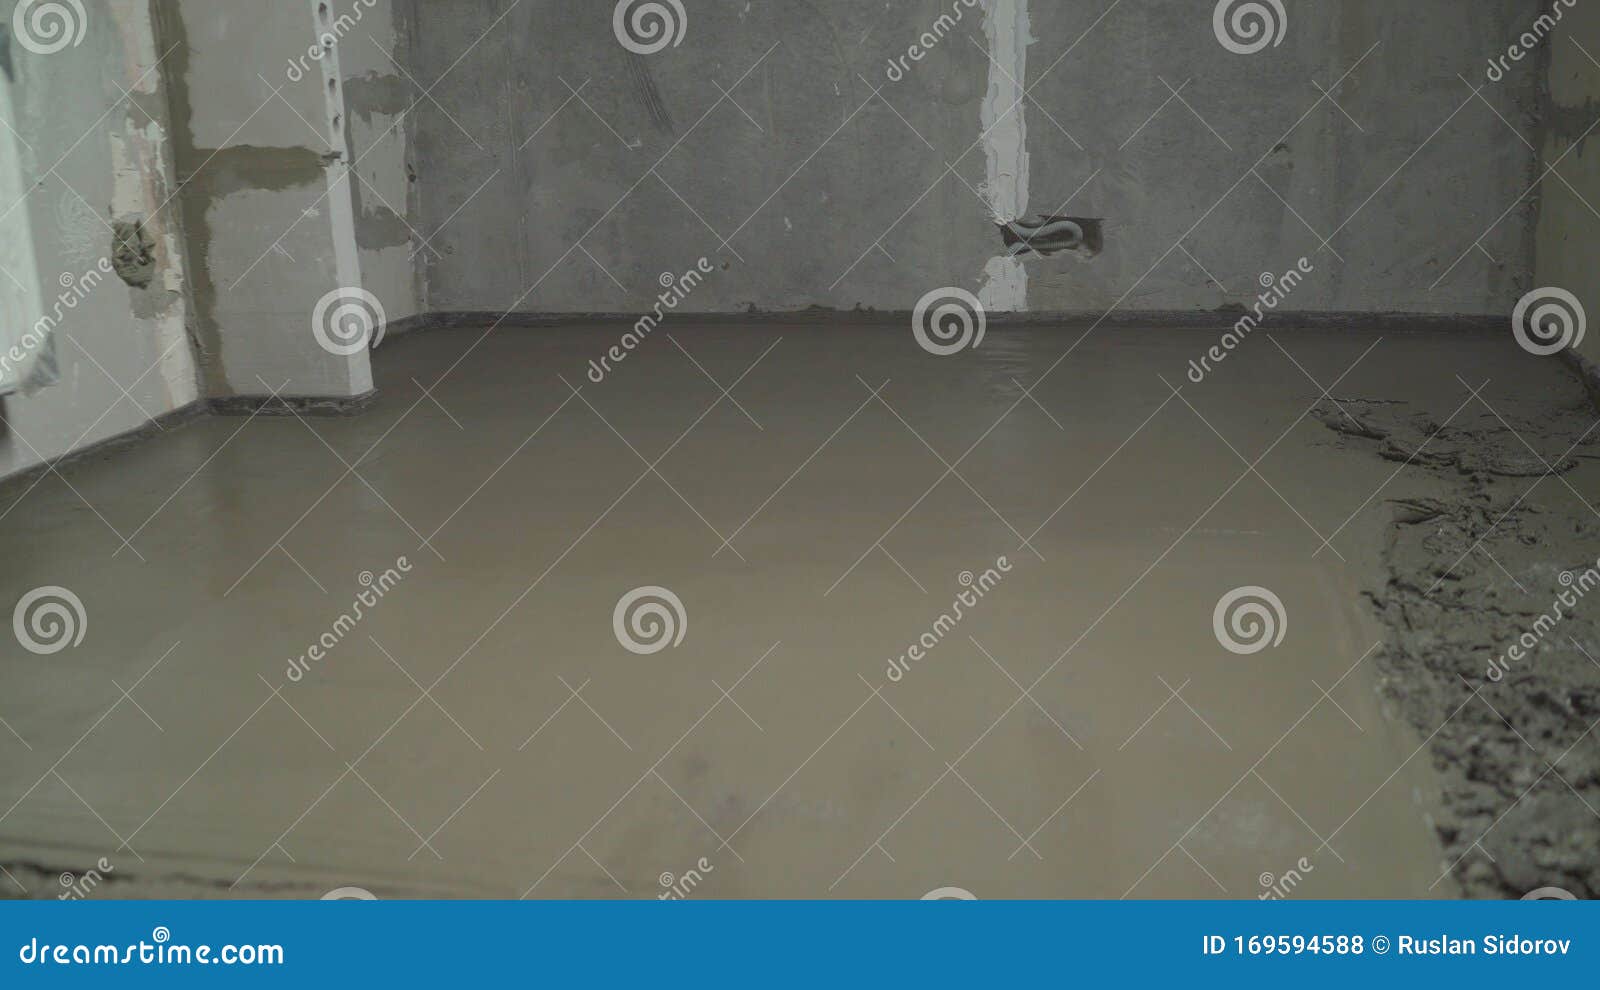 builder smoothing wet mortar floor pouring concrete worker uses spatula to level wet concrete floor leveling floor 169594588